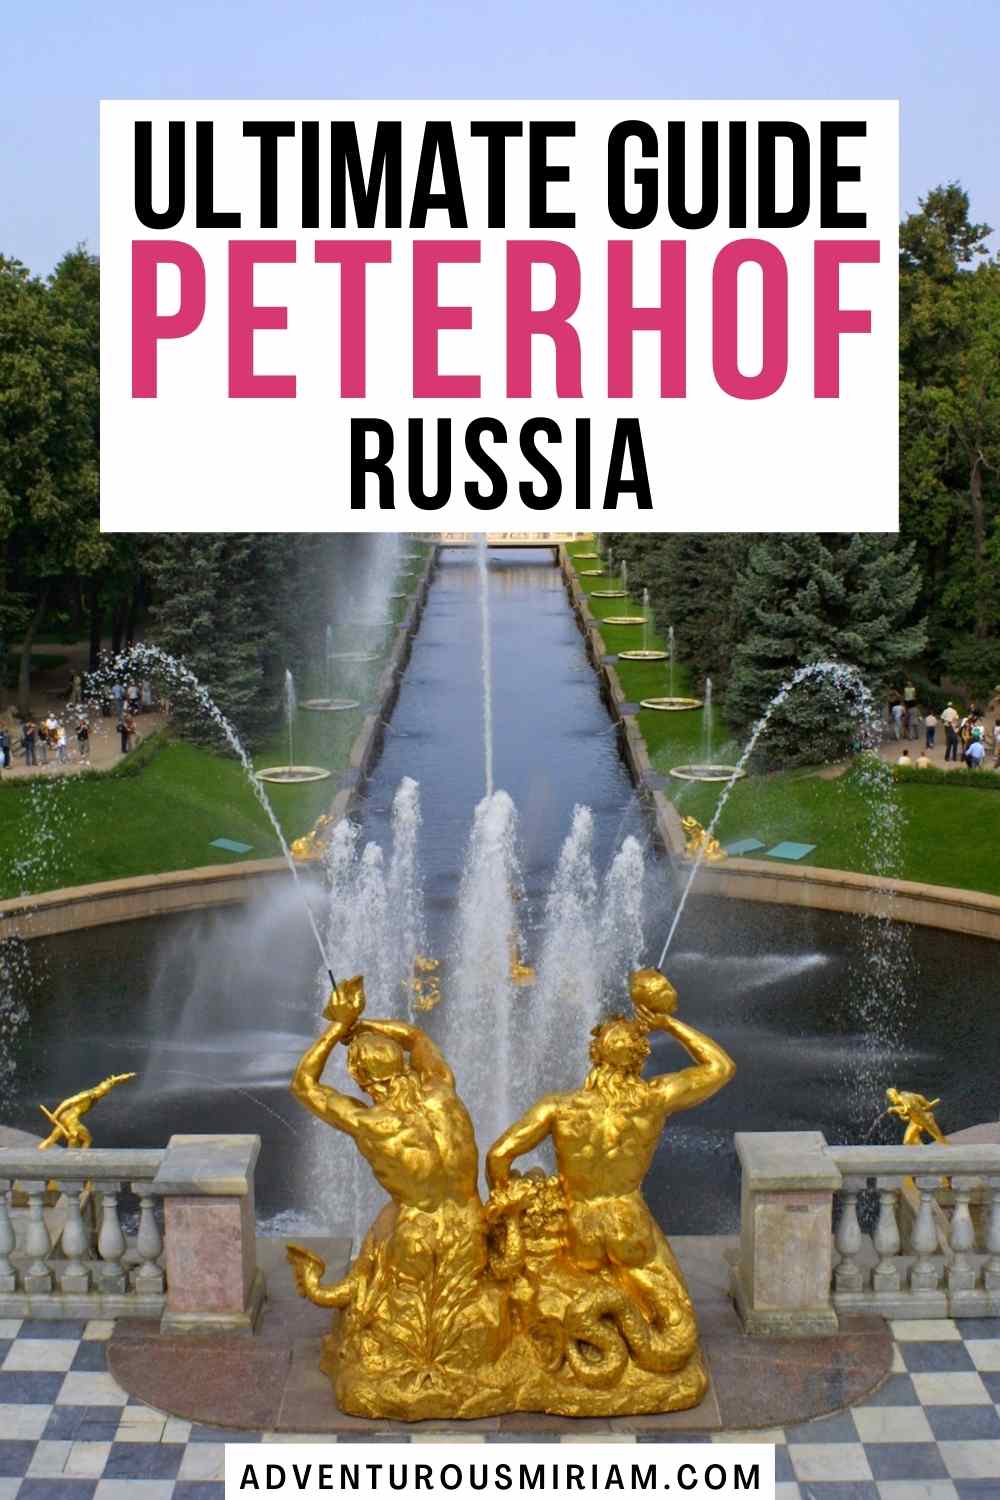 Peterhof Palace Russia is easily visited on a day trip from St Petersburg. Here's everything you need to know to plan your trip by hydrofoil to Peterhof, including entrance prices and what to see.